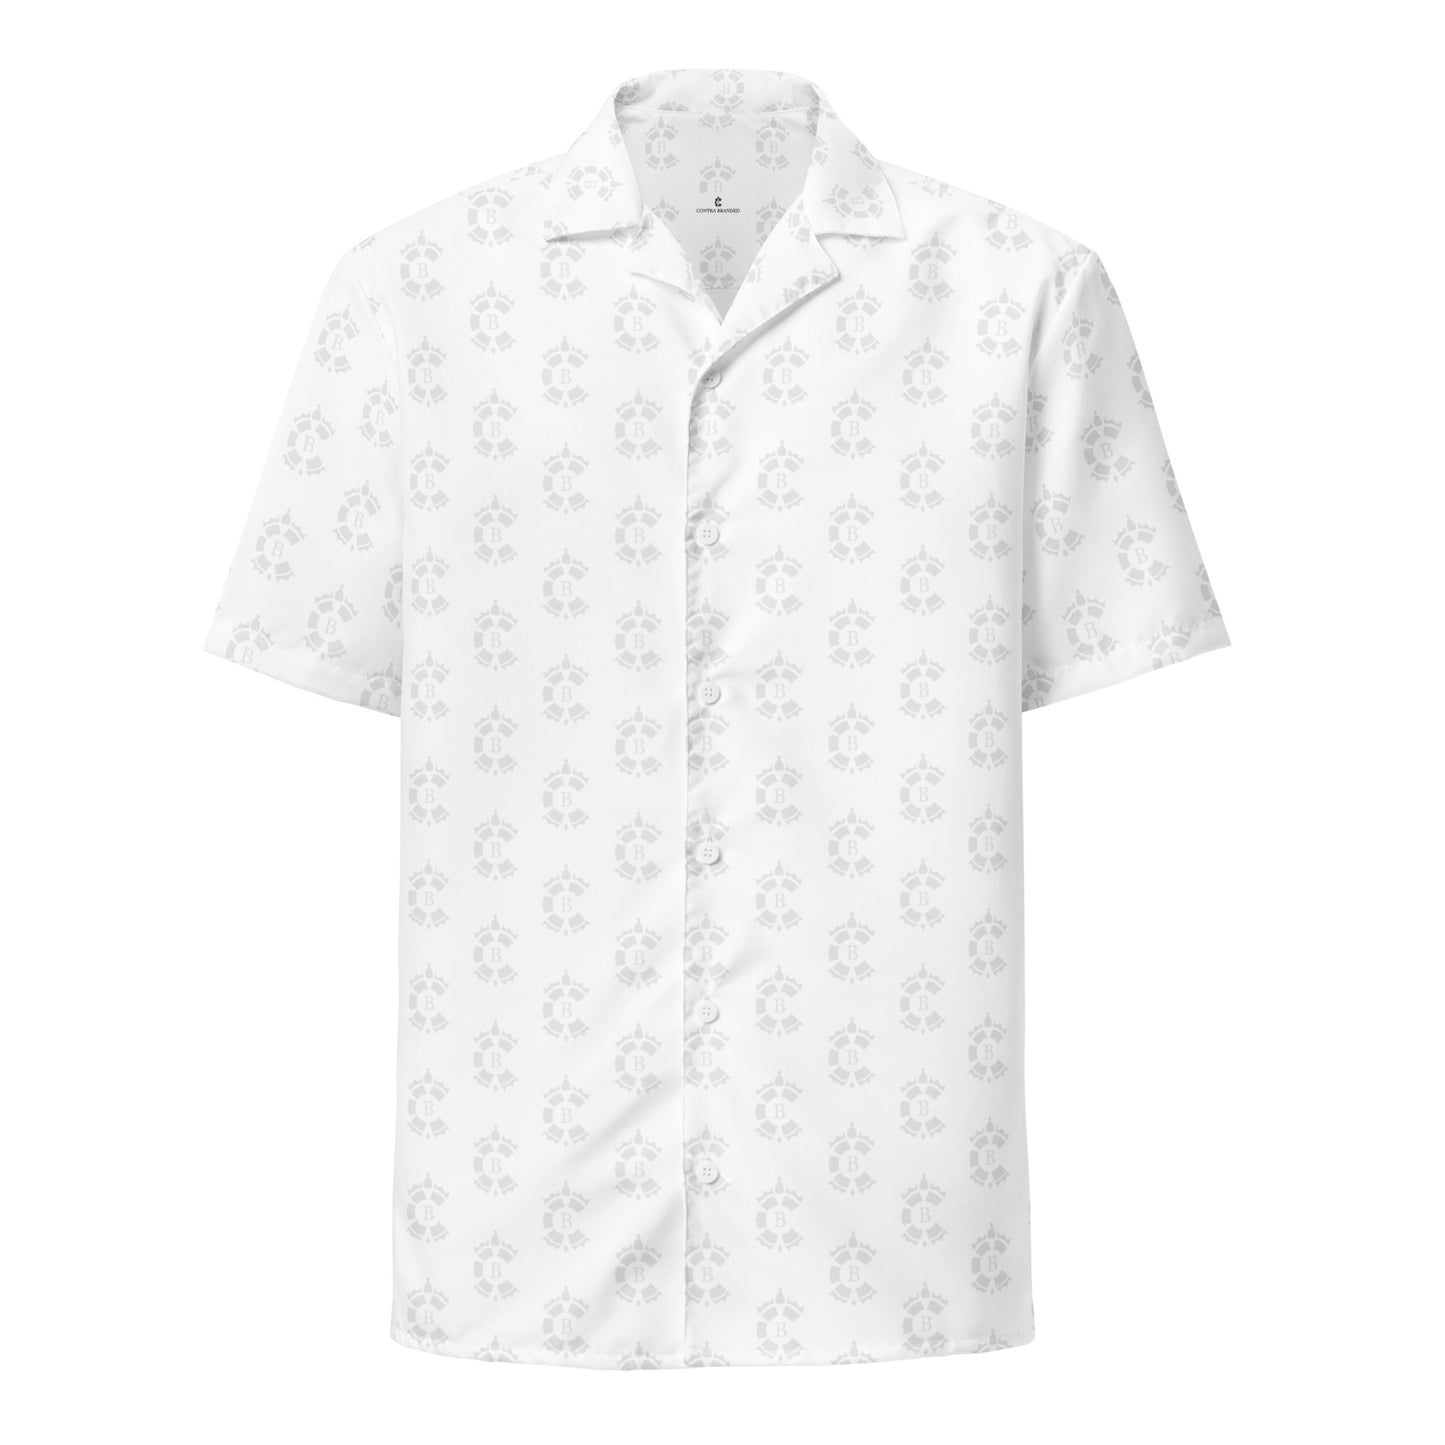 CONTRABRANDED R-Logos Button Up Short Sleeve Eggshell on White